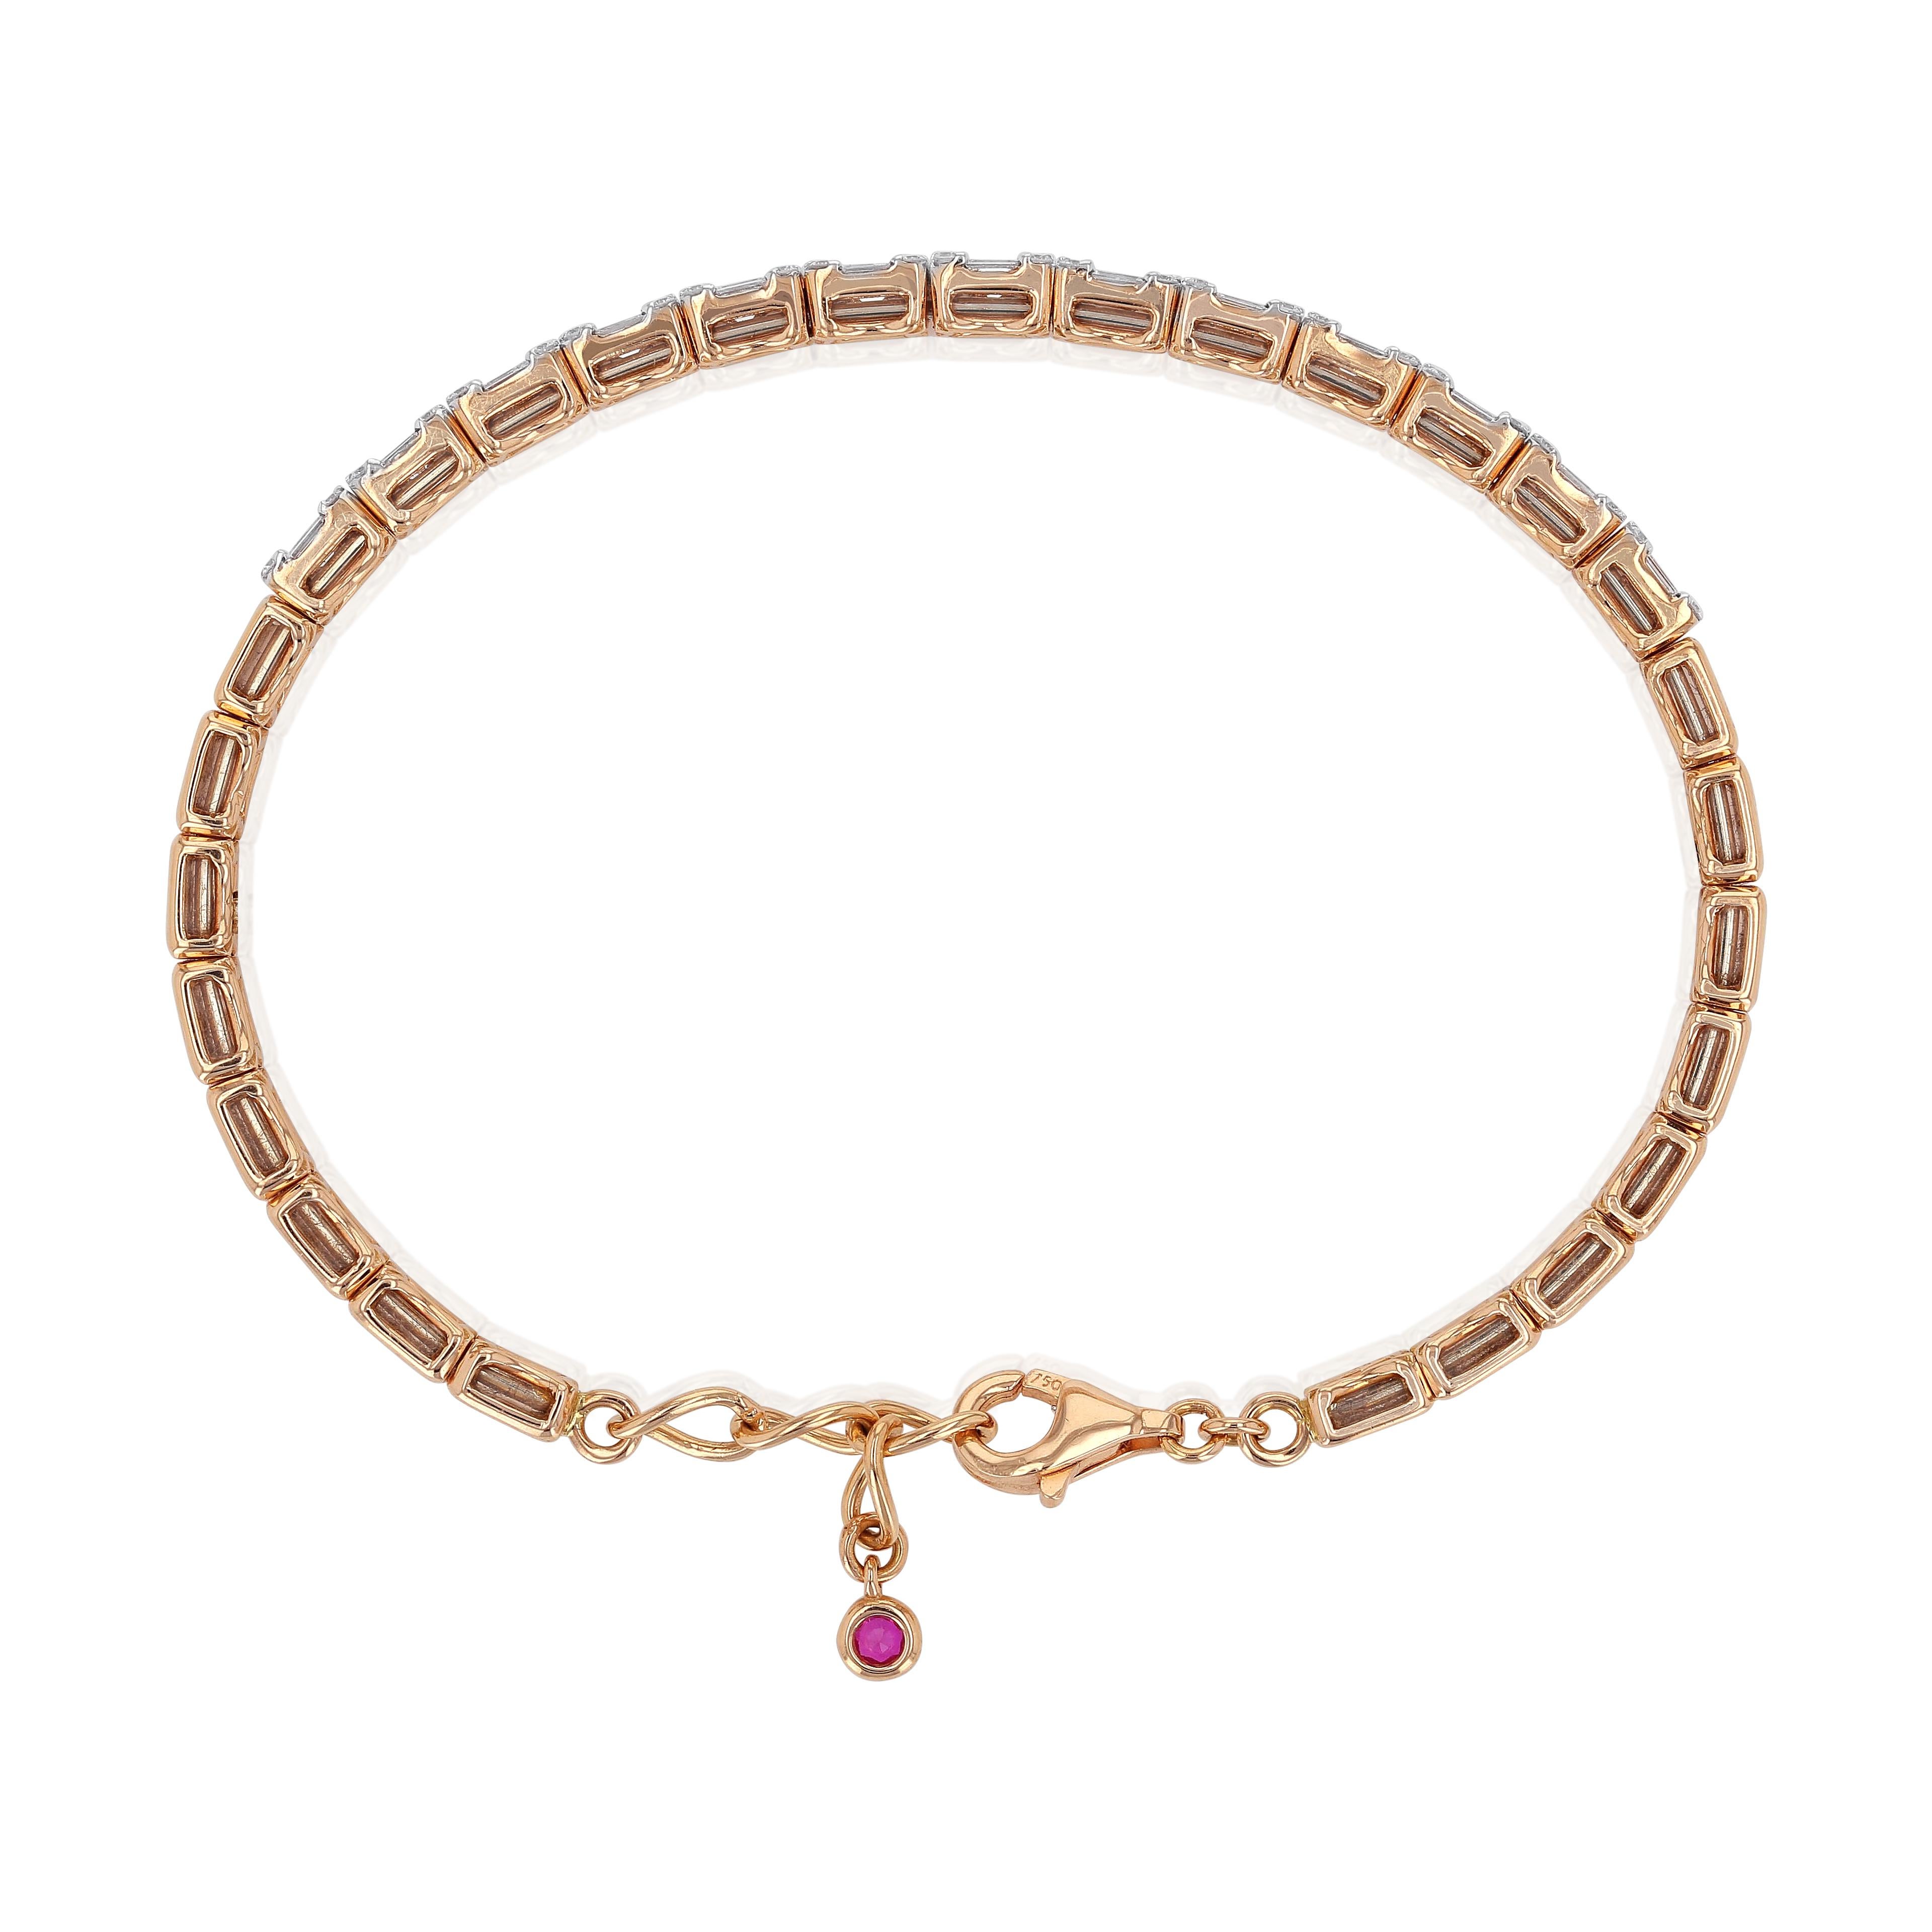 Charming, simple and classy rose gold 18K bracelet by Amwaj jewelry, with round and baguette diamonds, that are adding a dreamy, sparkling touch to this item. Delicately shaped so as not to overpower, perfectly accents your beauty and taste. It is